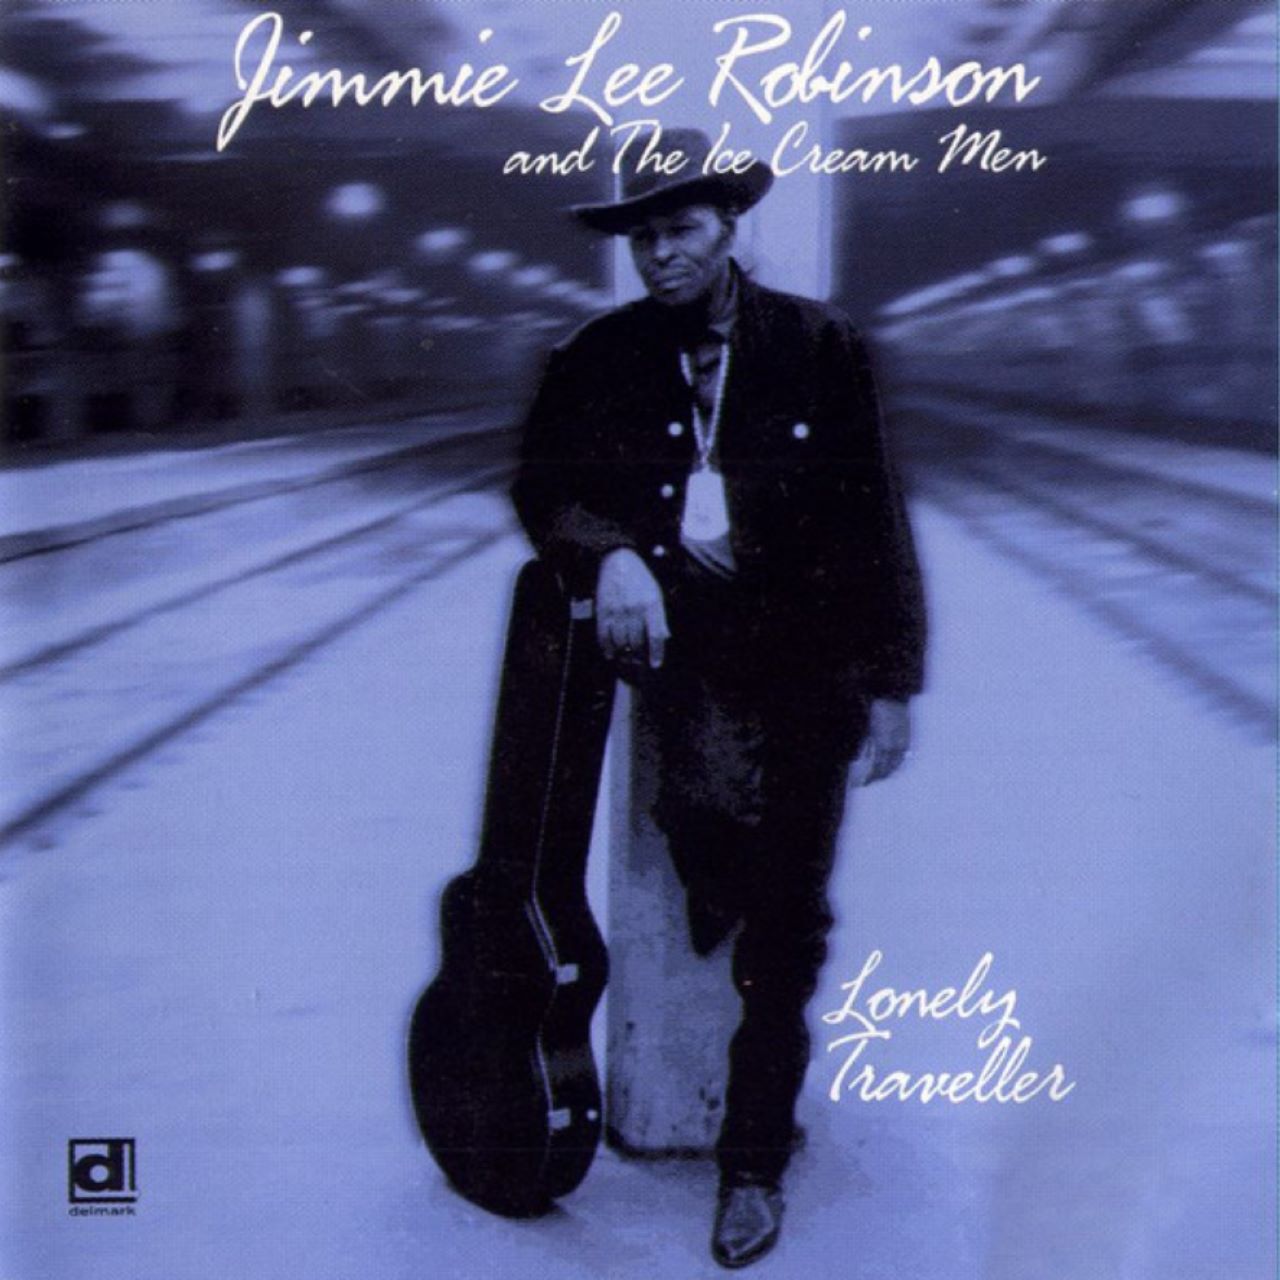 Jimmy Lee Robinson – Lonely Traveller cover album